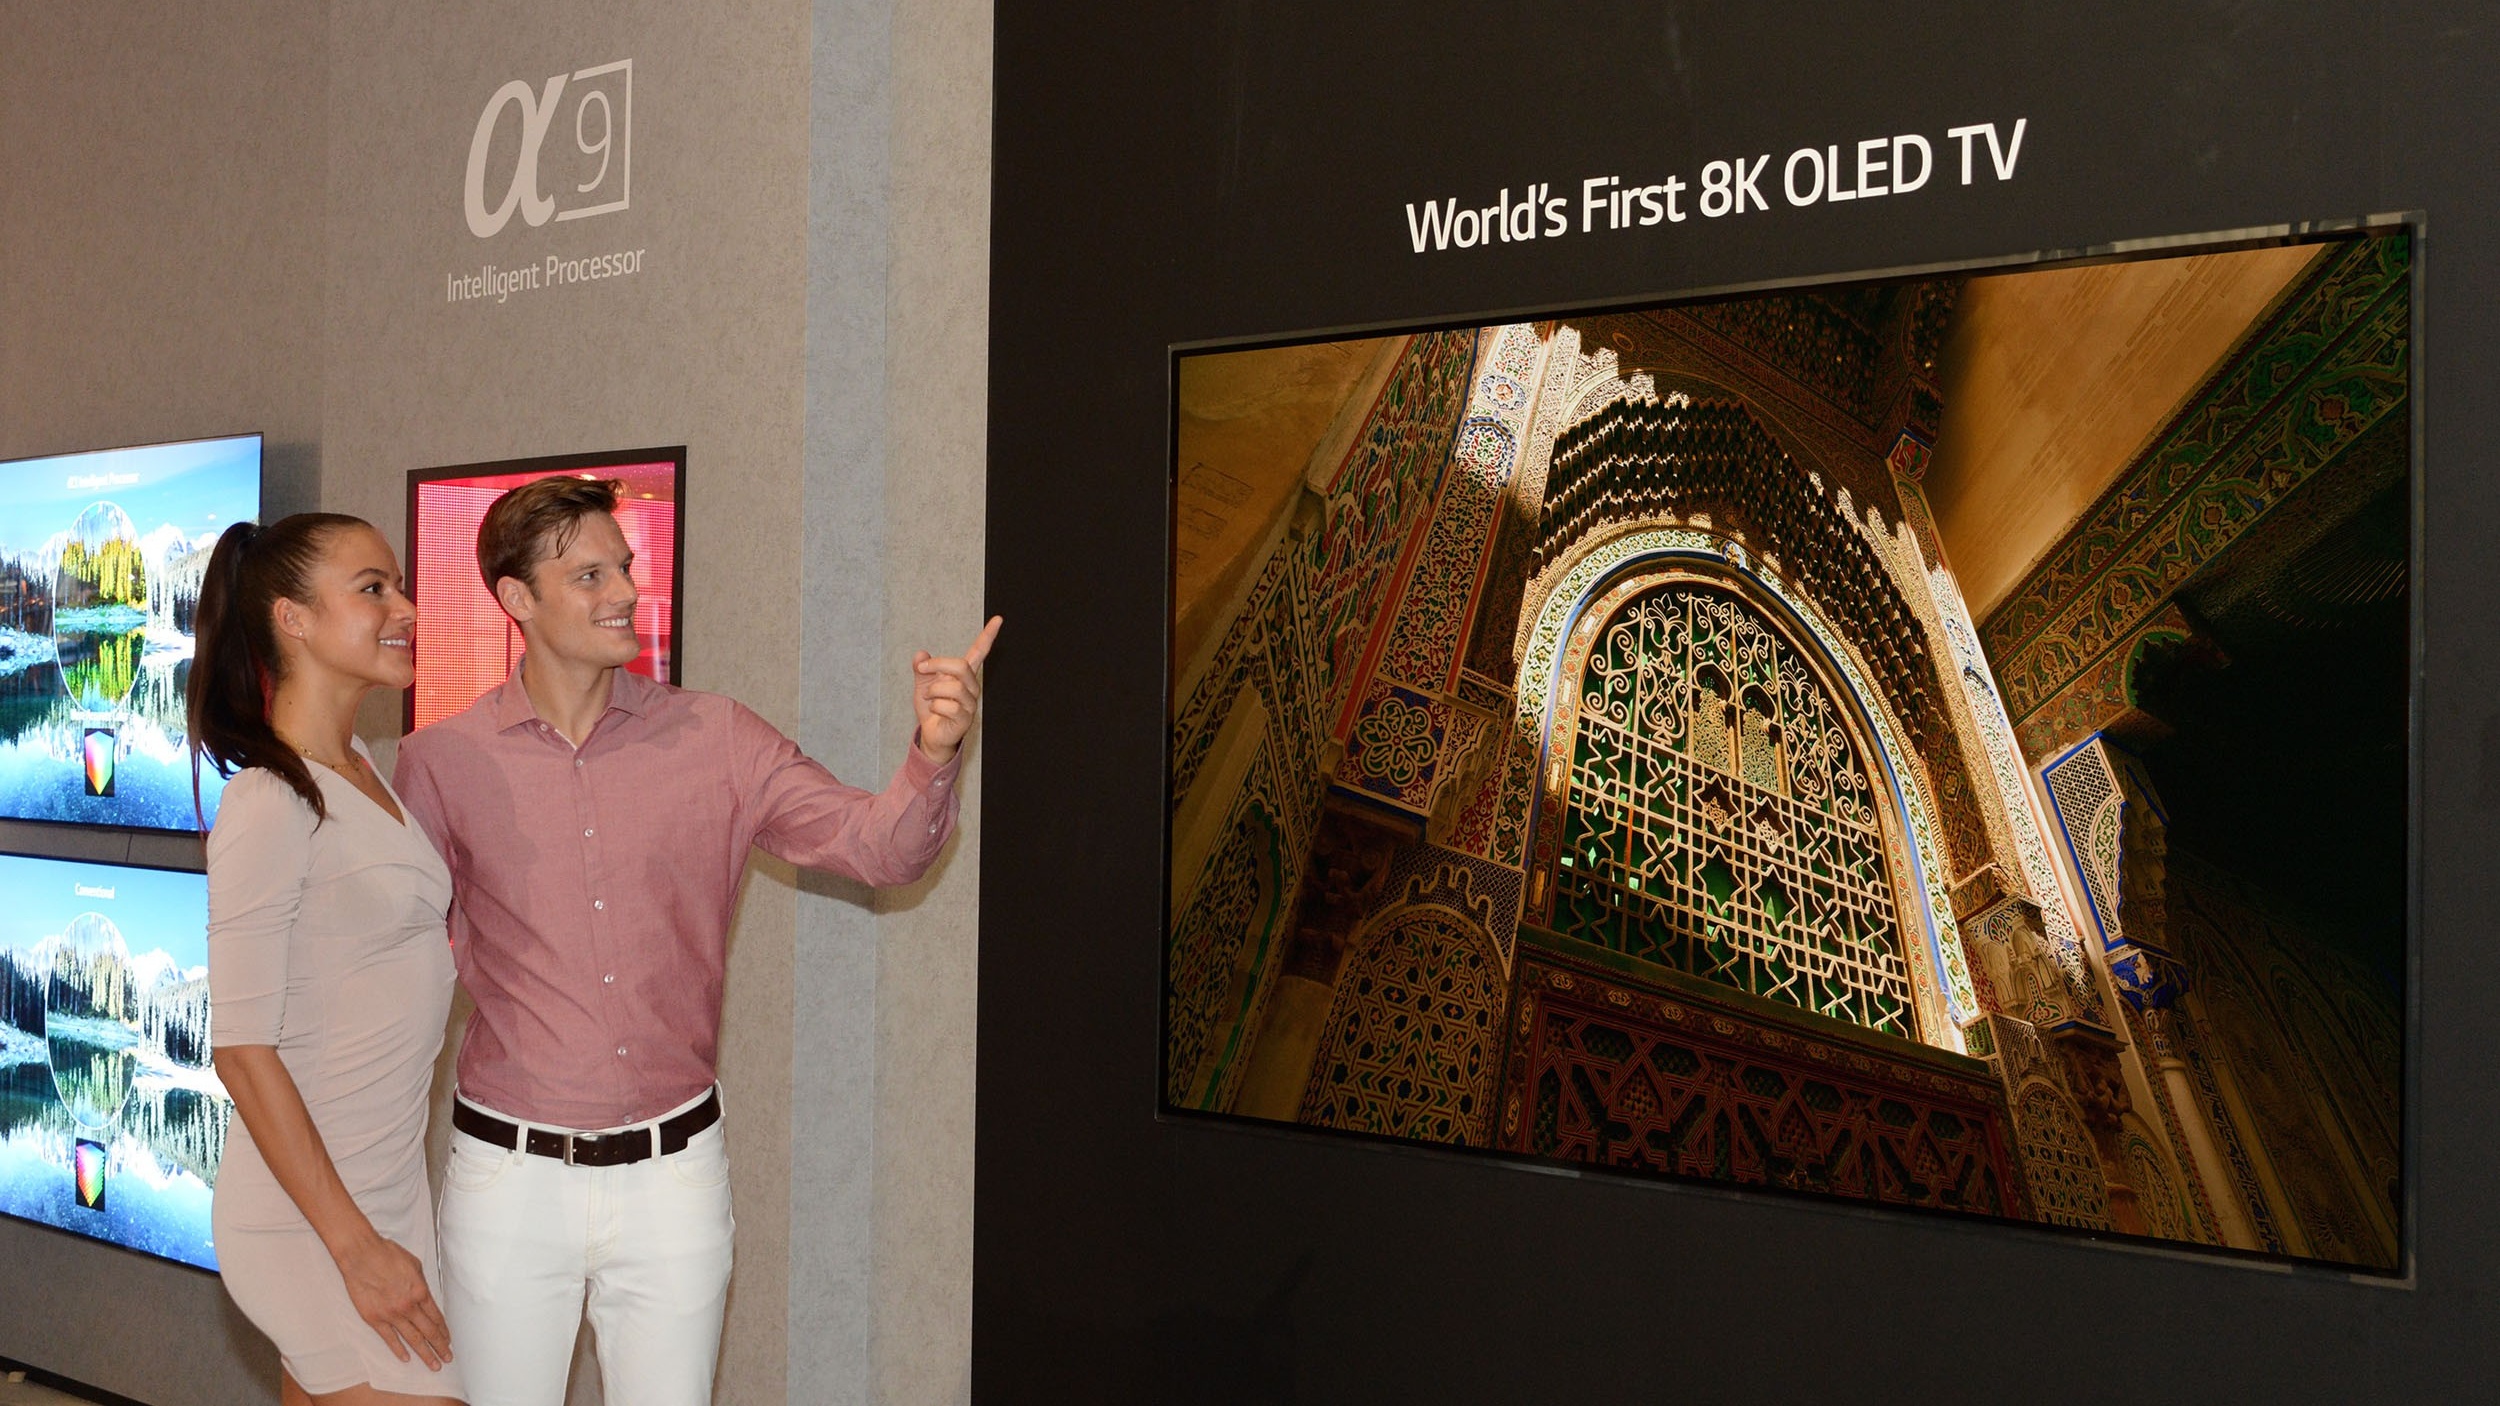 lg-launches-world-s-first-8k-oled-tv-but-you-probably-can-t-afford-it